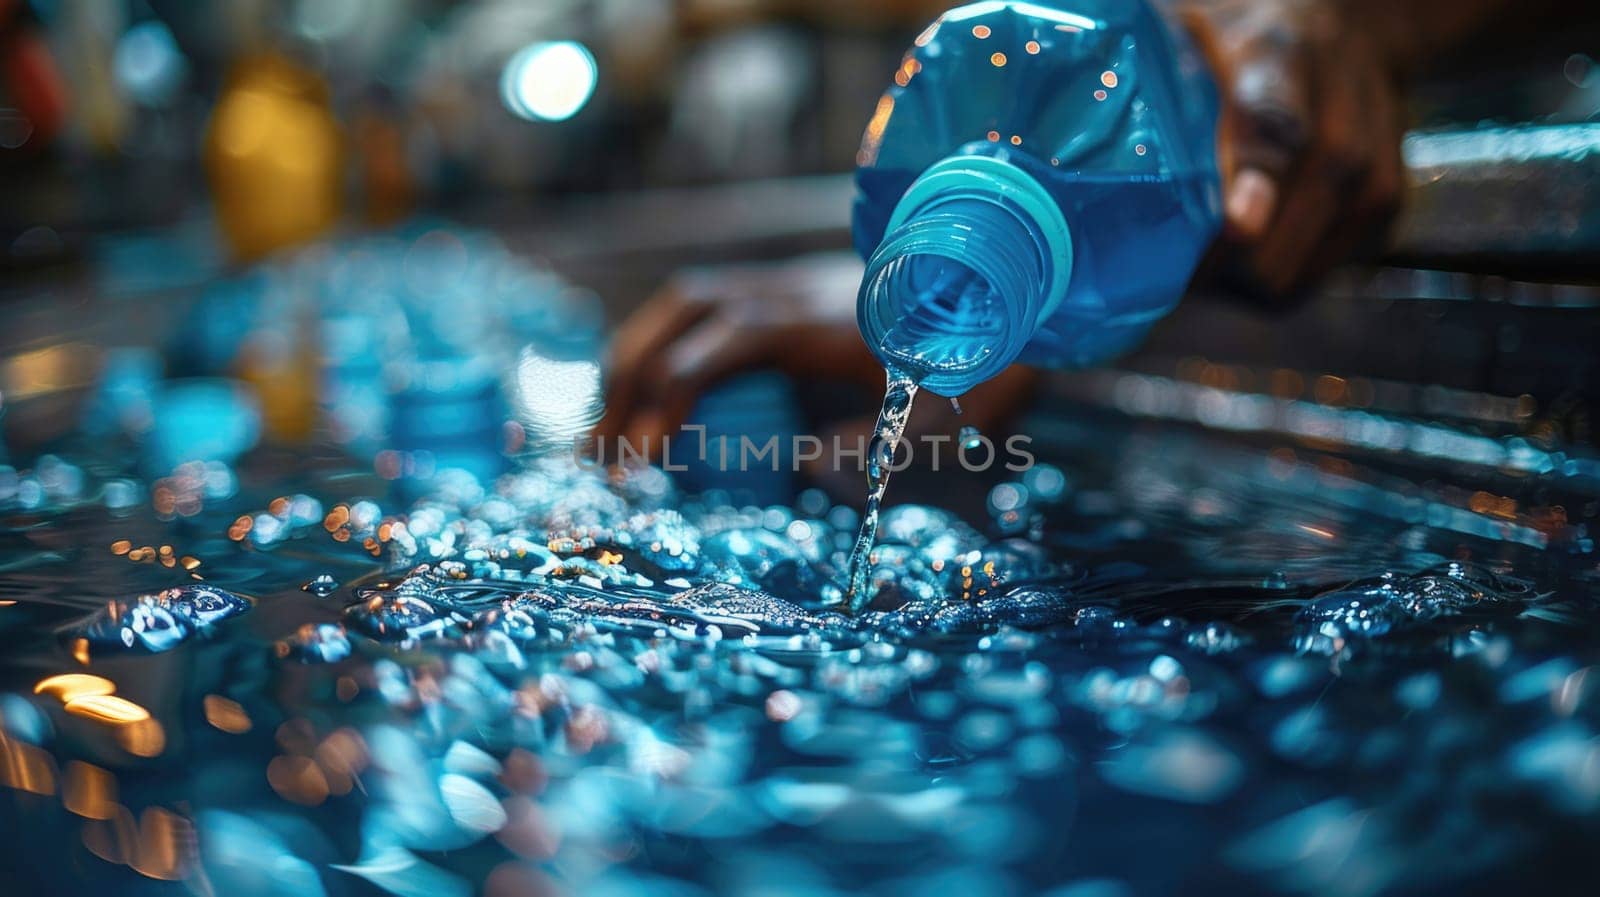 Close-up of hands skillfully pouring oil from a plastic bottle onto a glistening metallic surface, showing dexterity and precision.